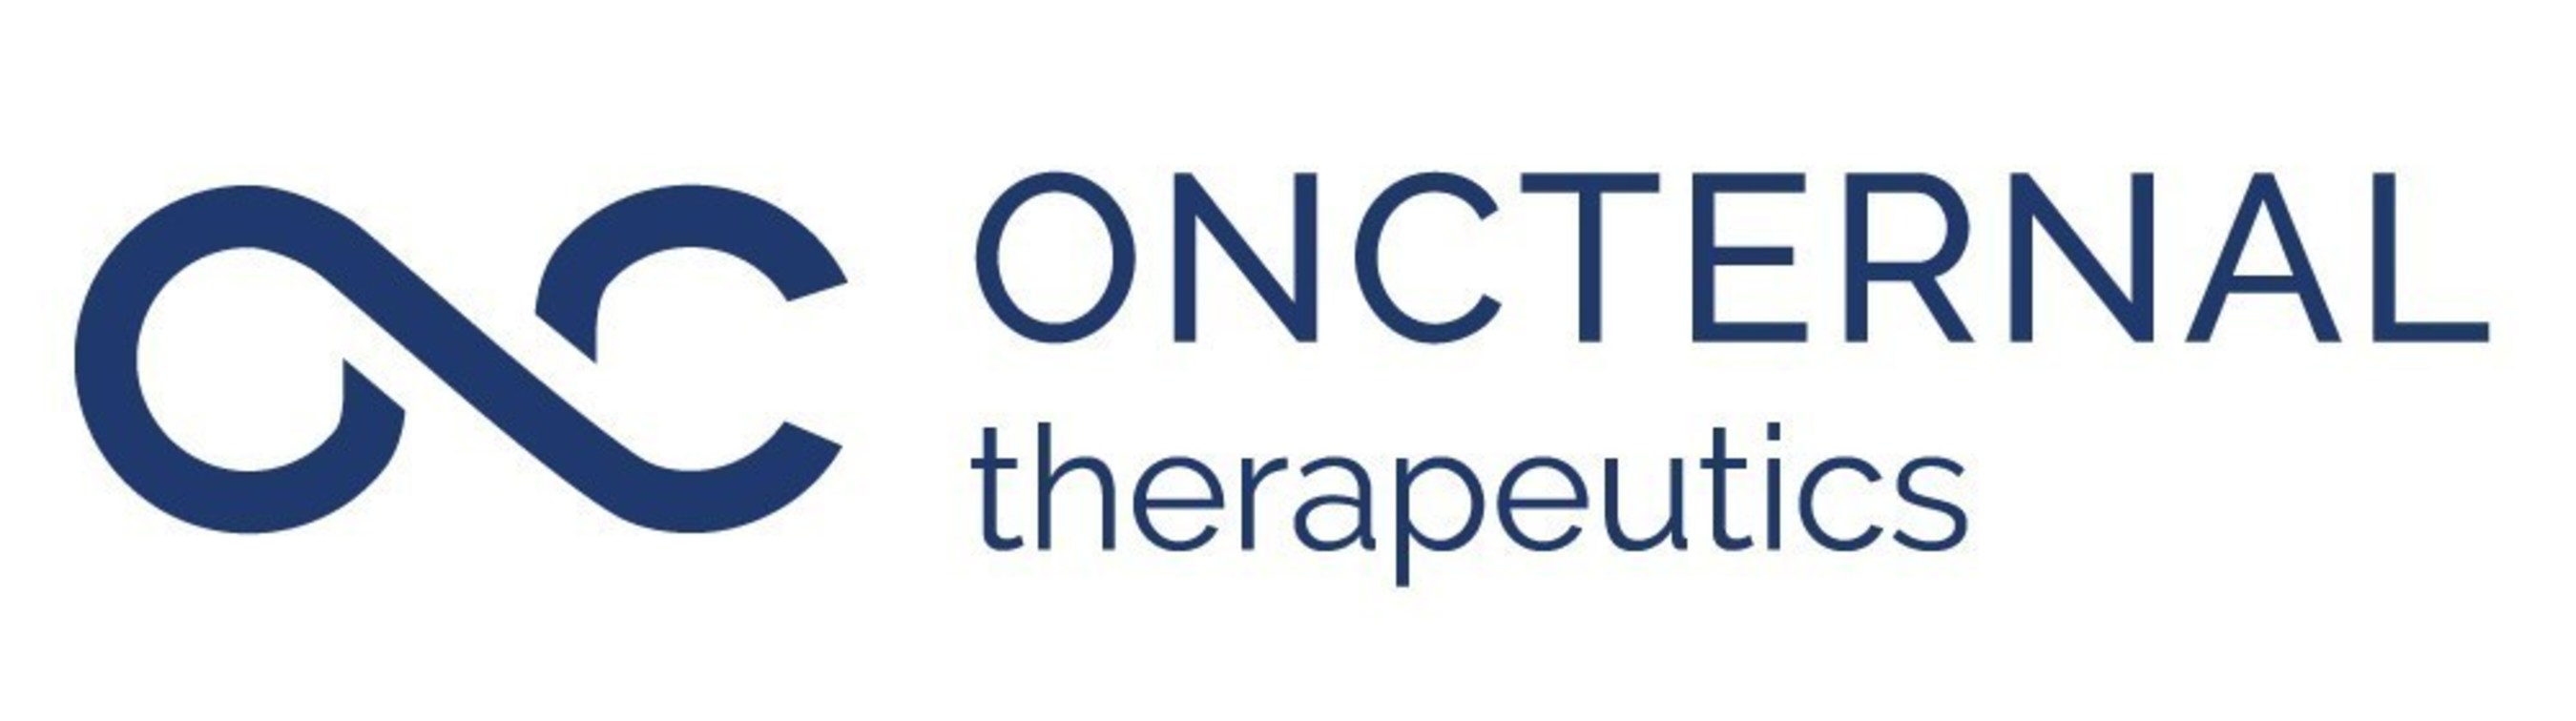 Oncternal Therapeutics, Inc. is a clinical-stage oncology company focused on developing first-in-class therapies for rare and common cancers